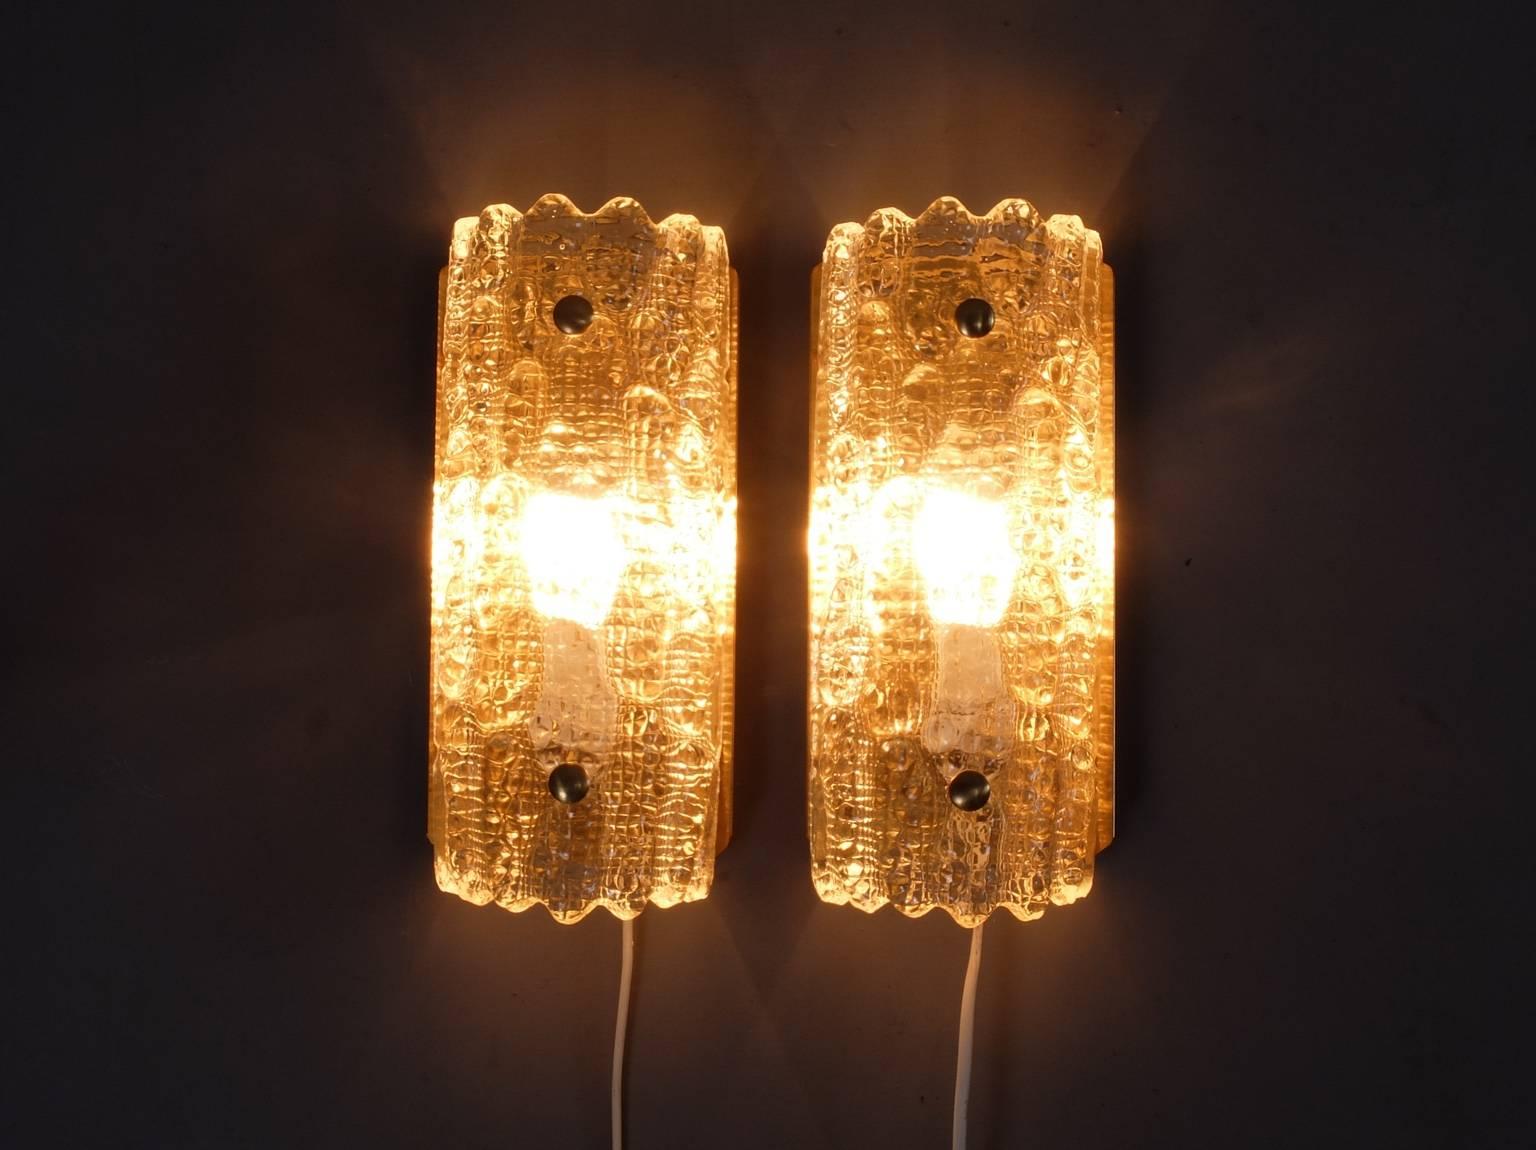 A pair of Carl Fagerlund Orrefors glass sconces produced by Lyfa in the 1960s. These wall lights feature curved and textured glass from Swedish glass company Orrefors and are designed by Carl Fagerlund. The manufacturer is Danish lighting specialist